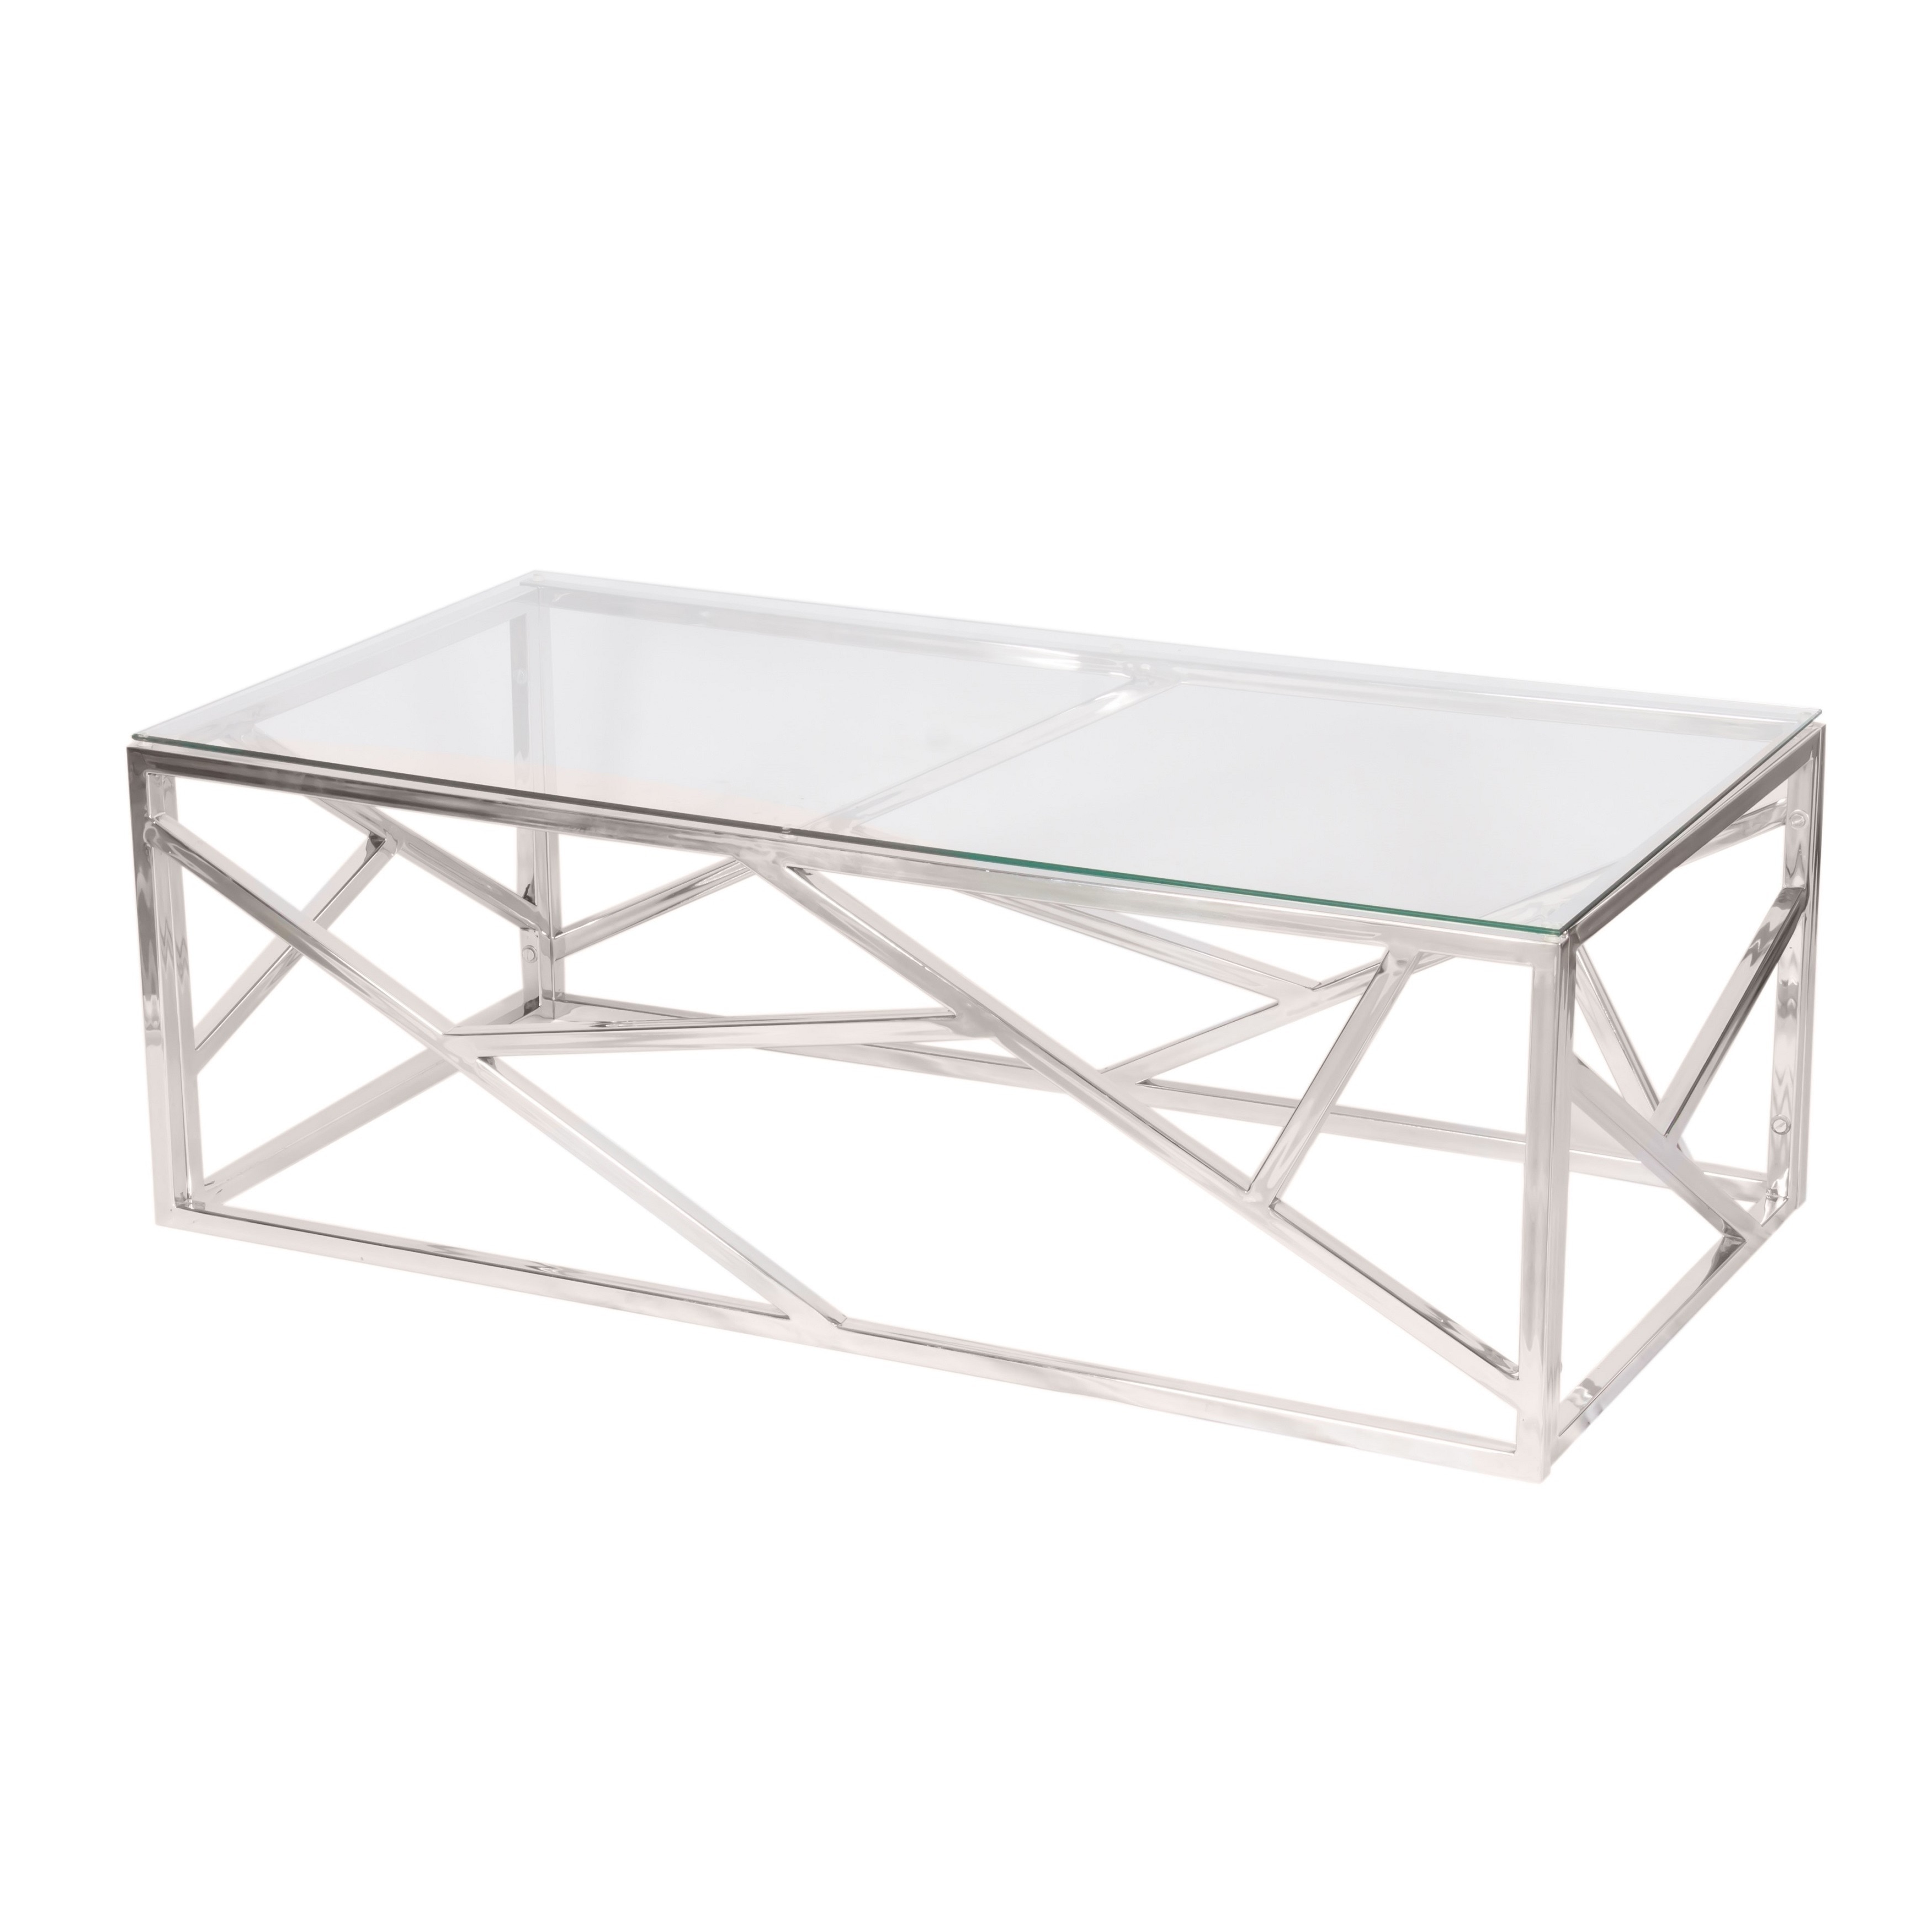 sterling silvertone stainless steel coffee table with clear glass lorelei accent top side cabinet living room outdoor seating west elm mid century bedside cherry oak end tables